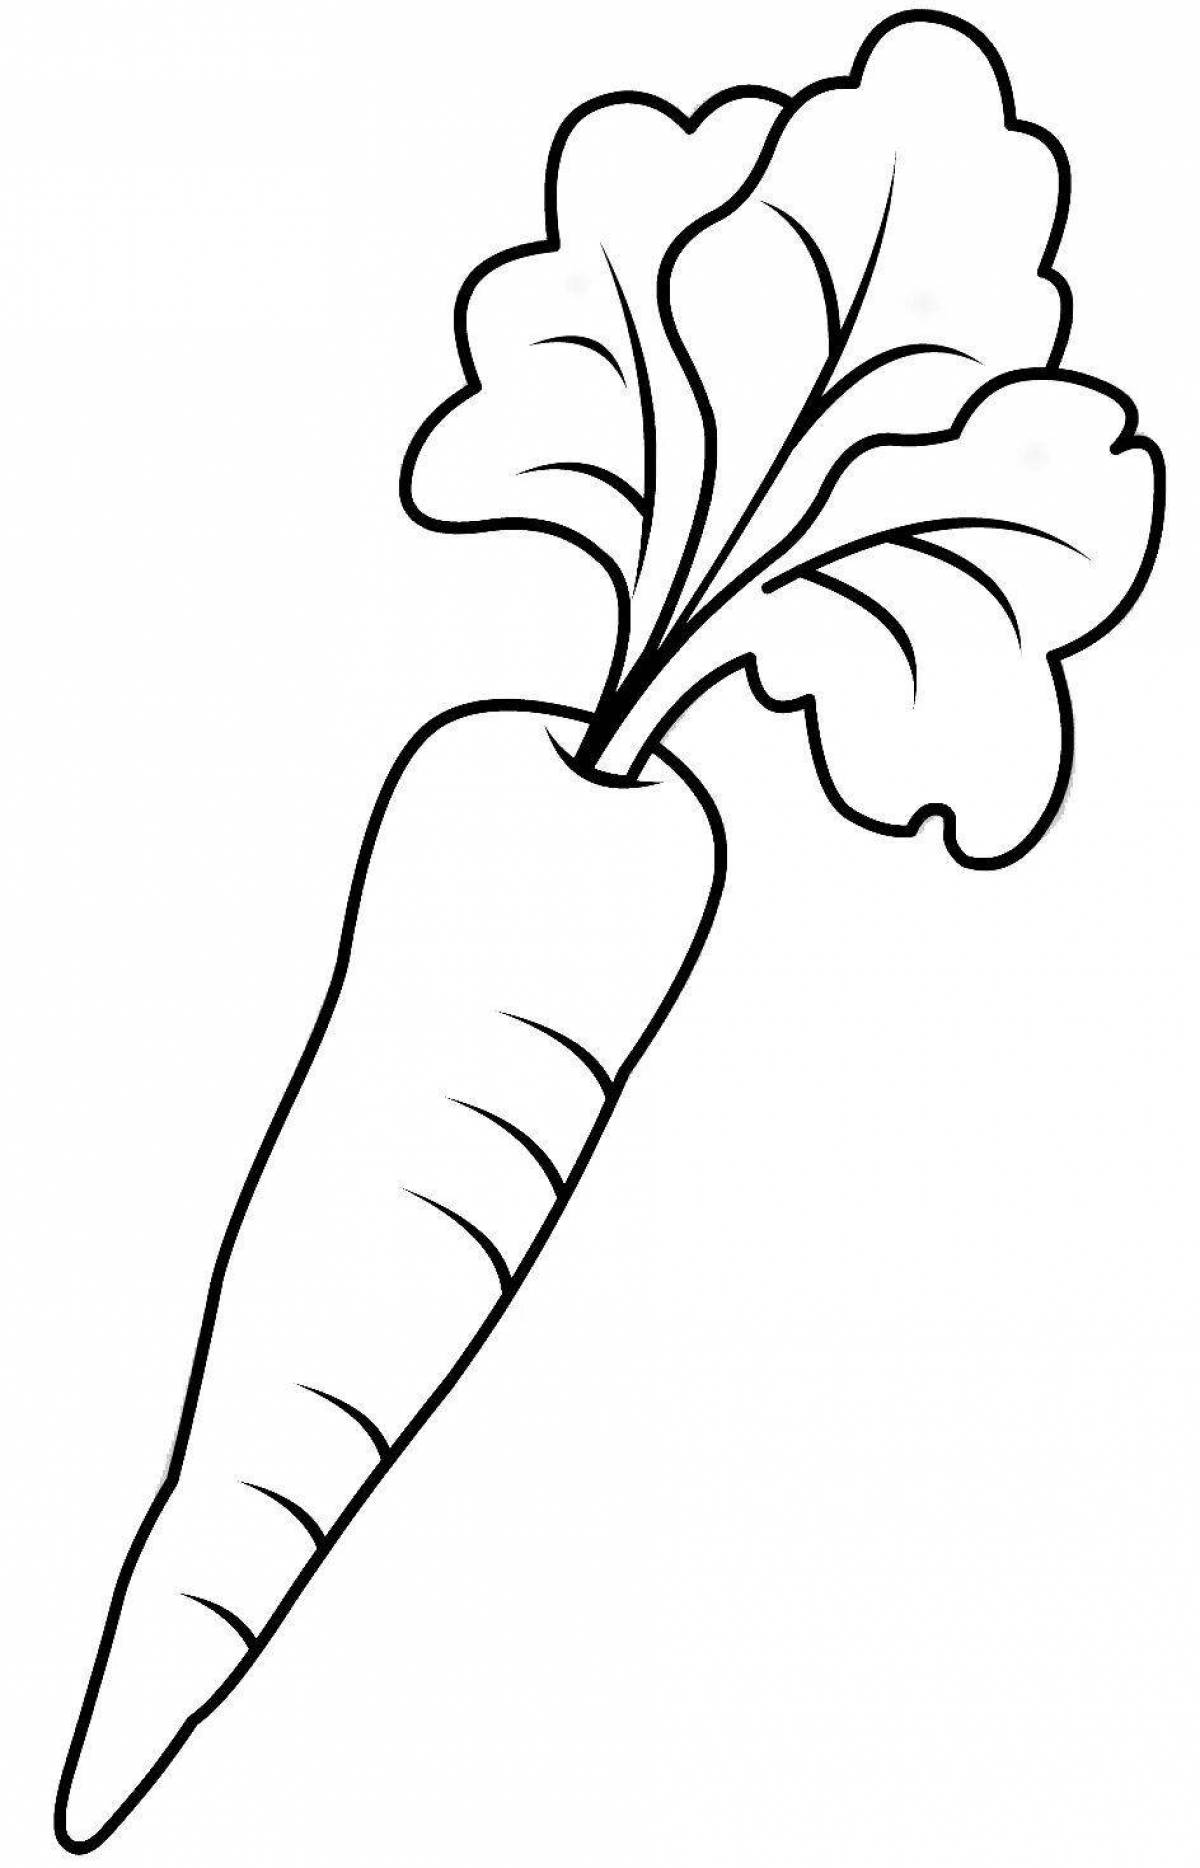 Amazing carrot coloring book for kids 2-3 years old